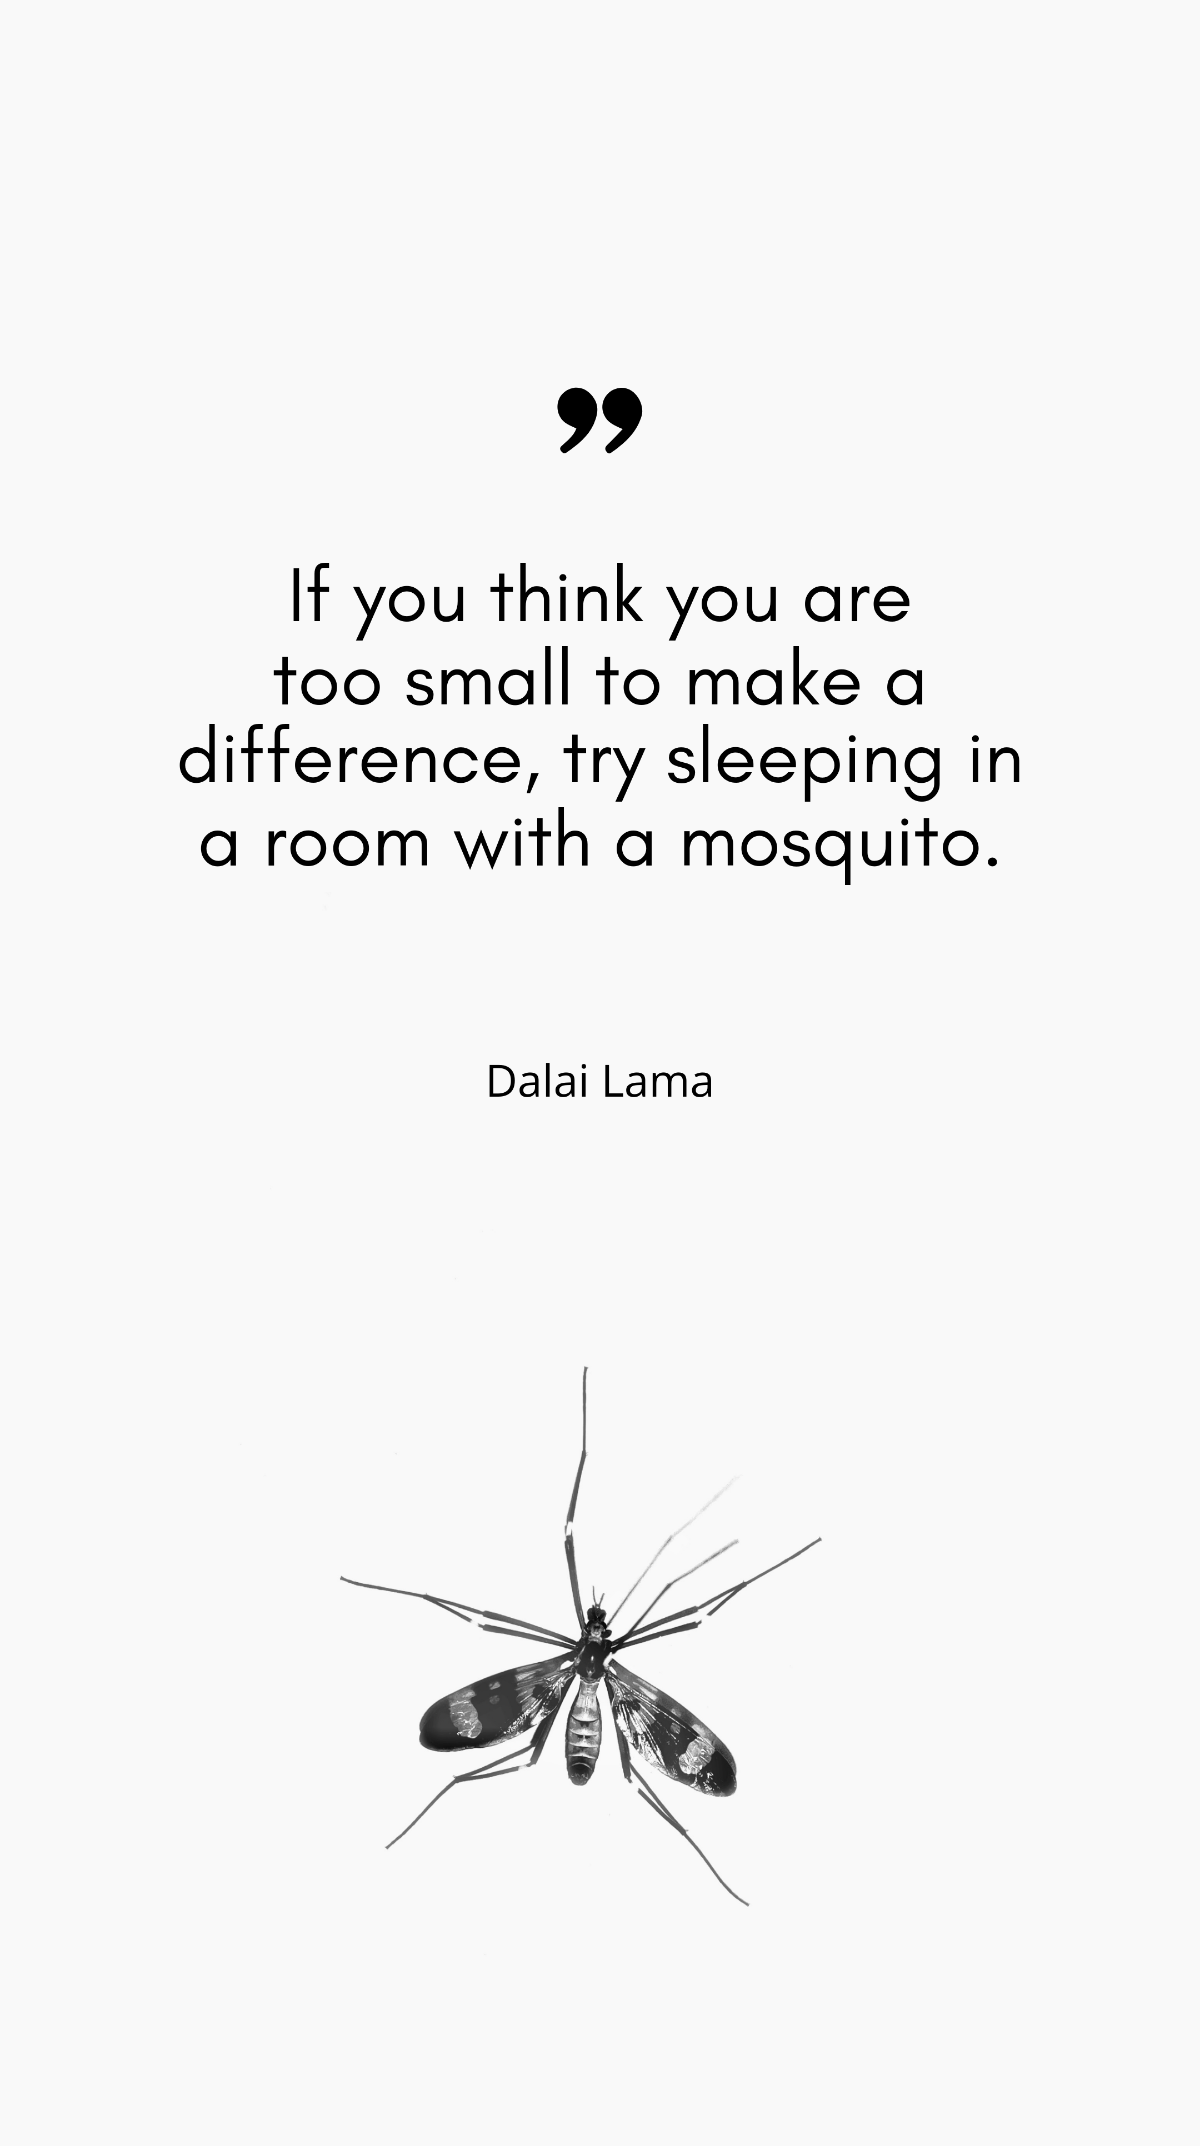 Dalai Lama - If you think you are too small to make a difference, try sleeping in a room with a mosquito.